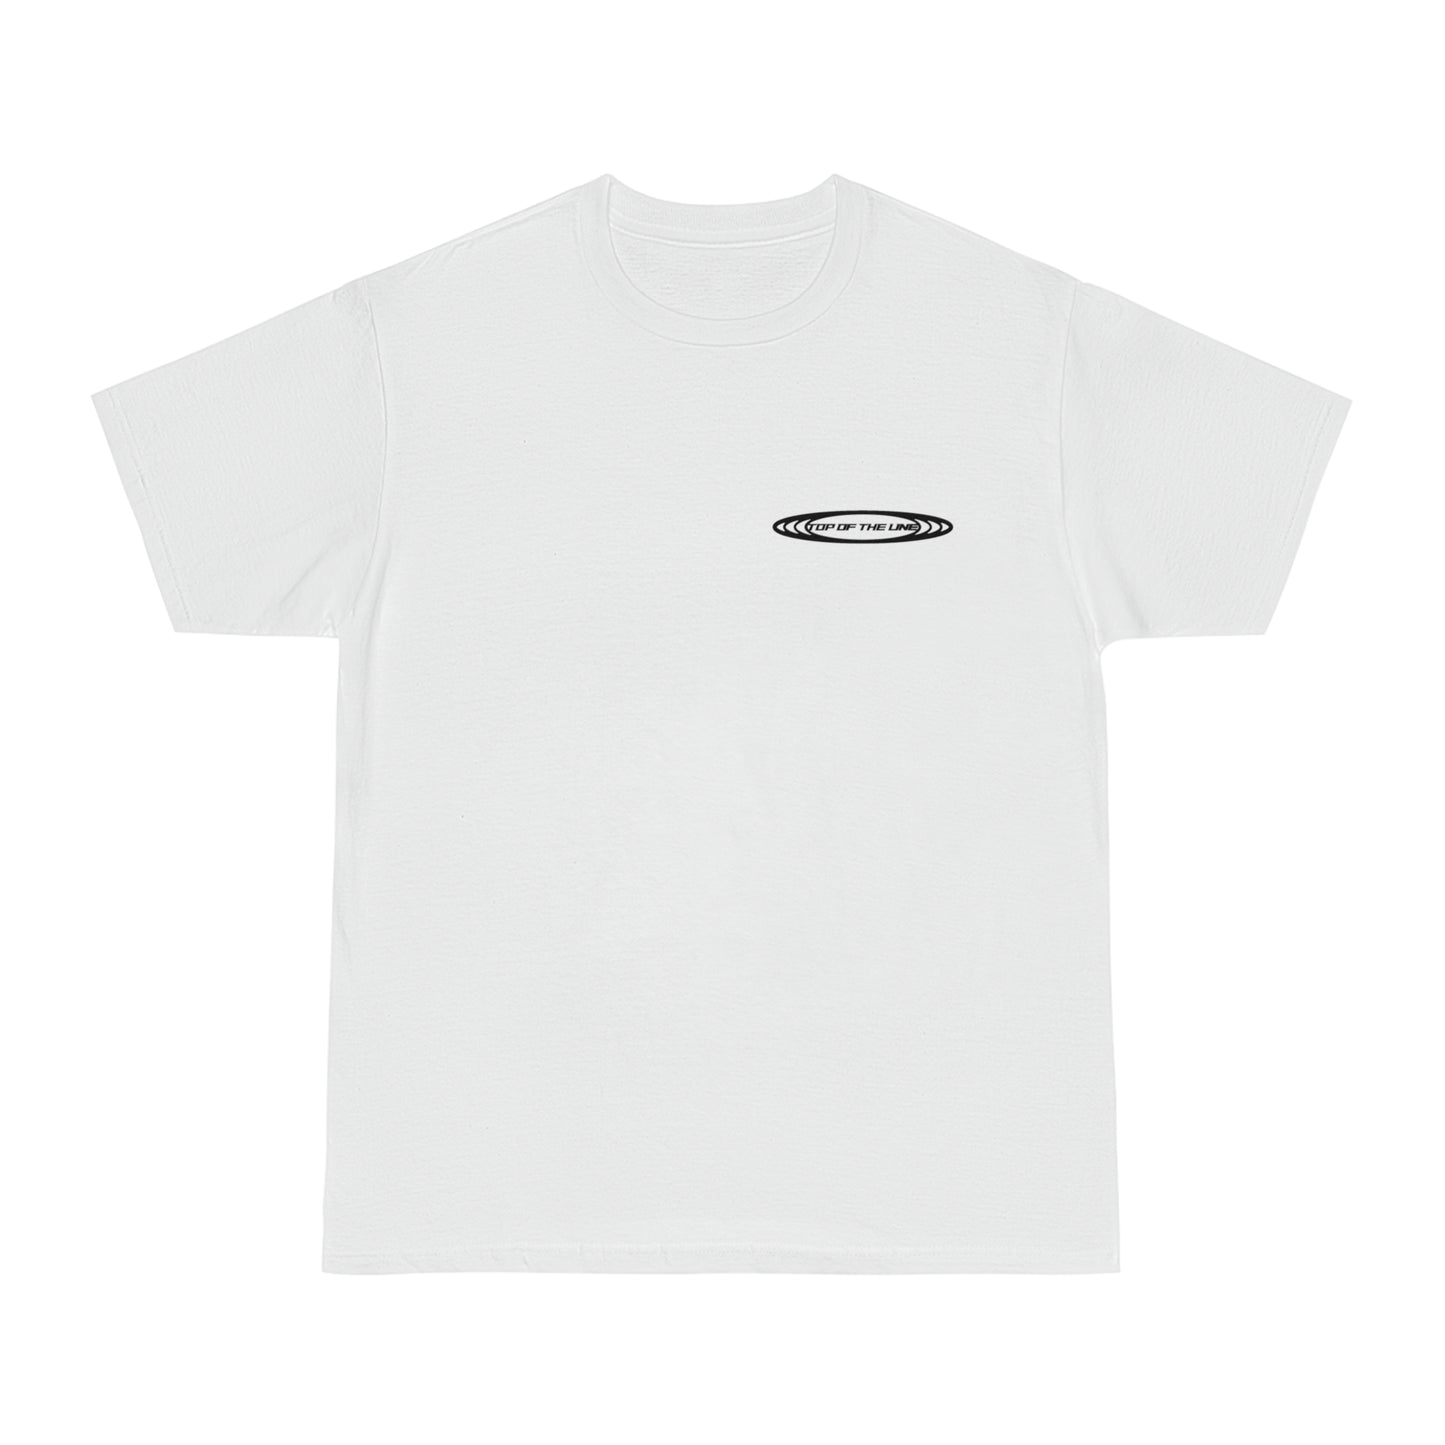 TOP CLASSIC TEE IN WHITE